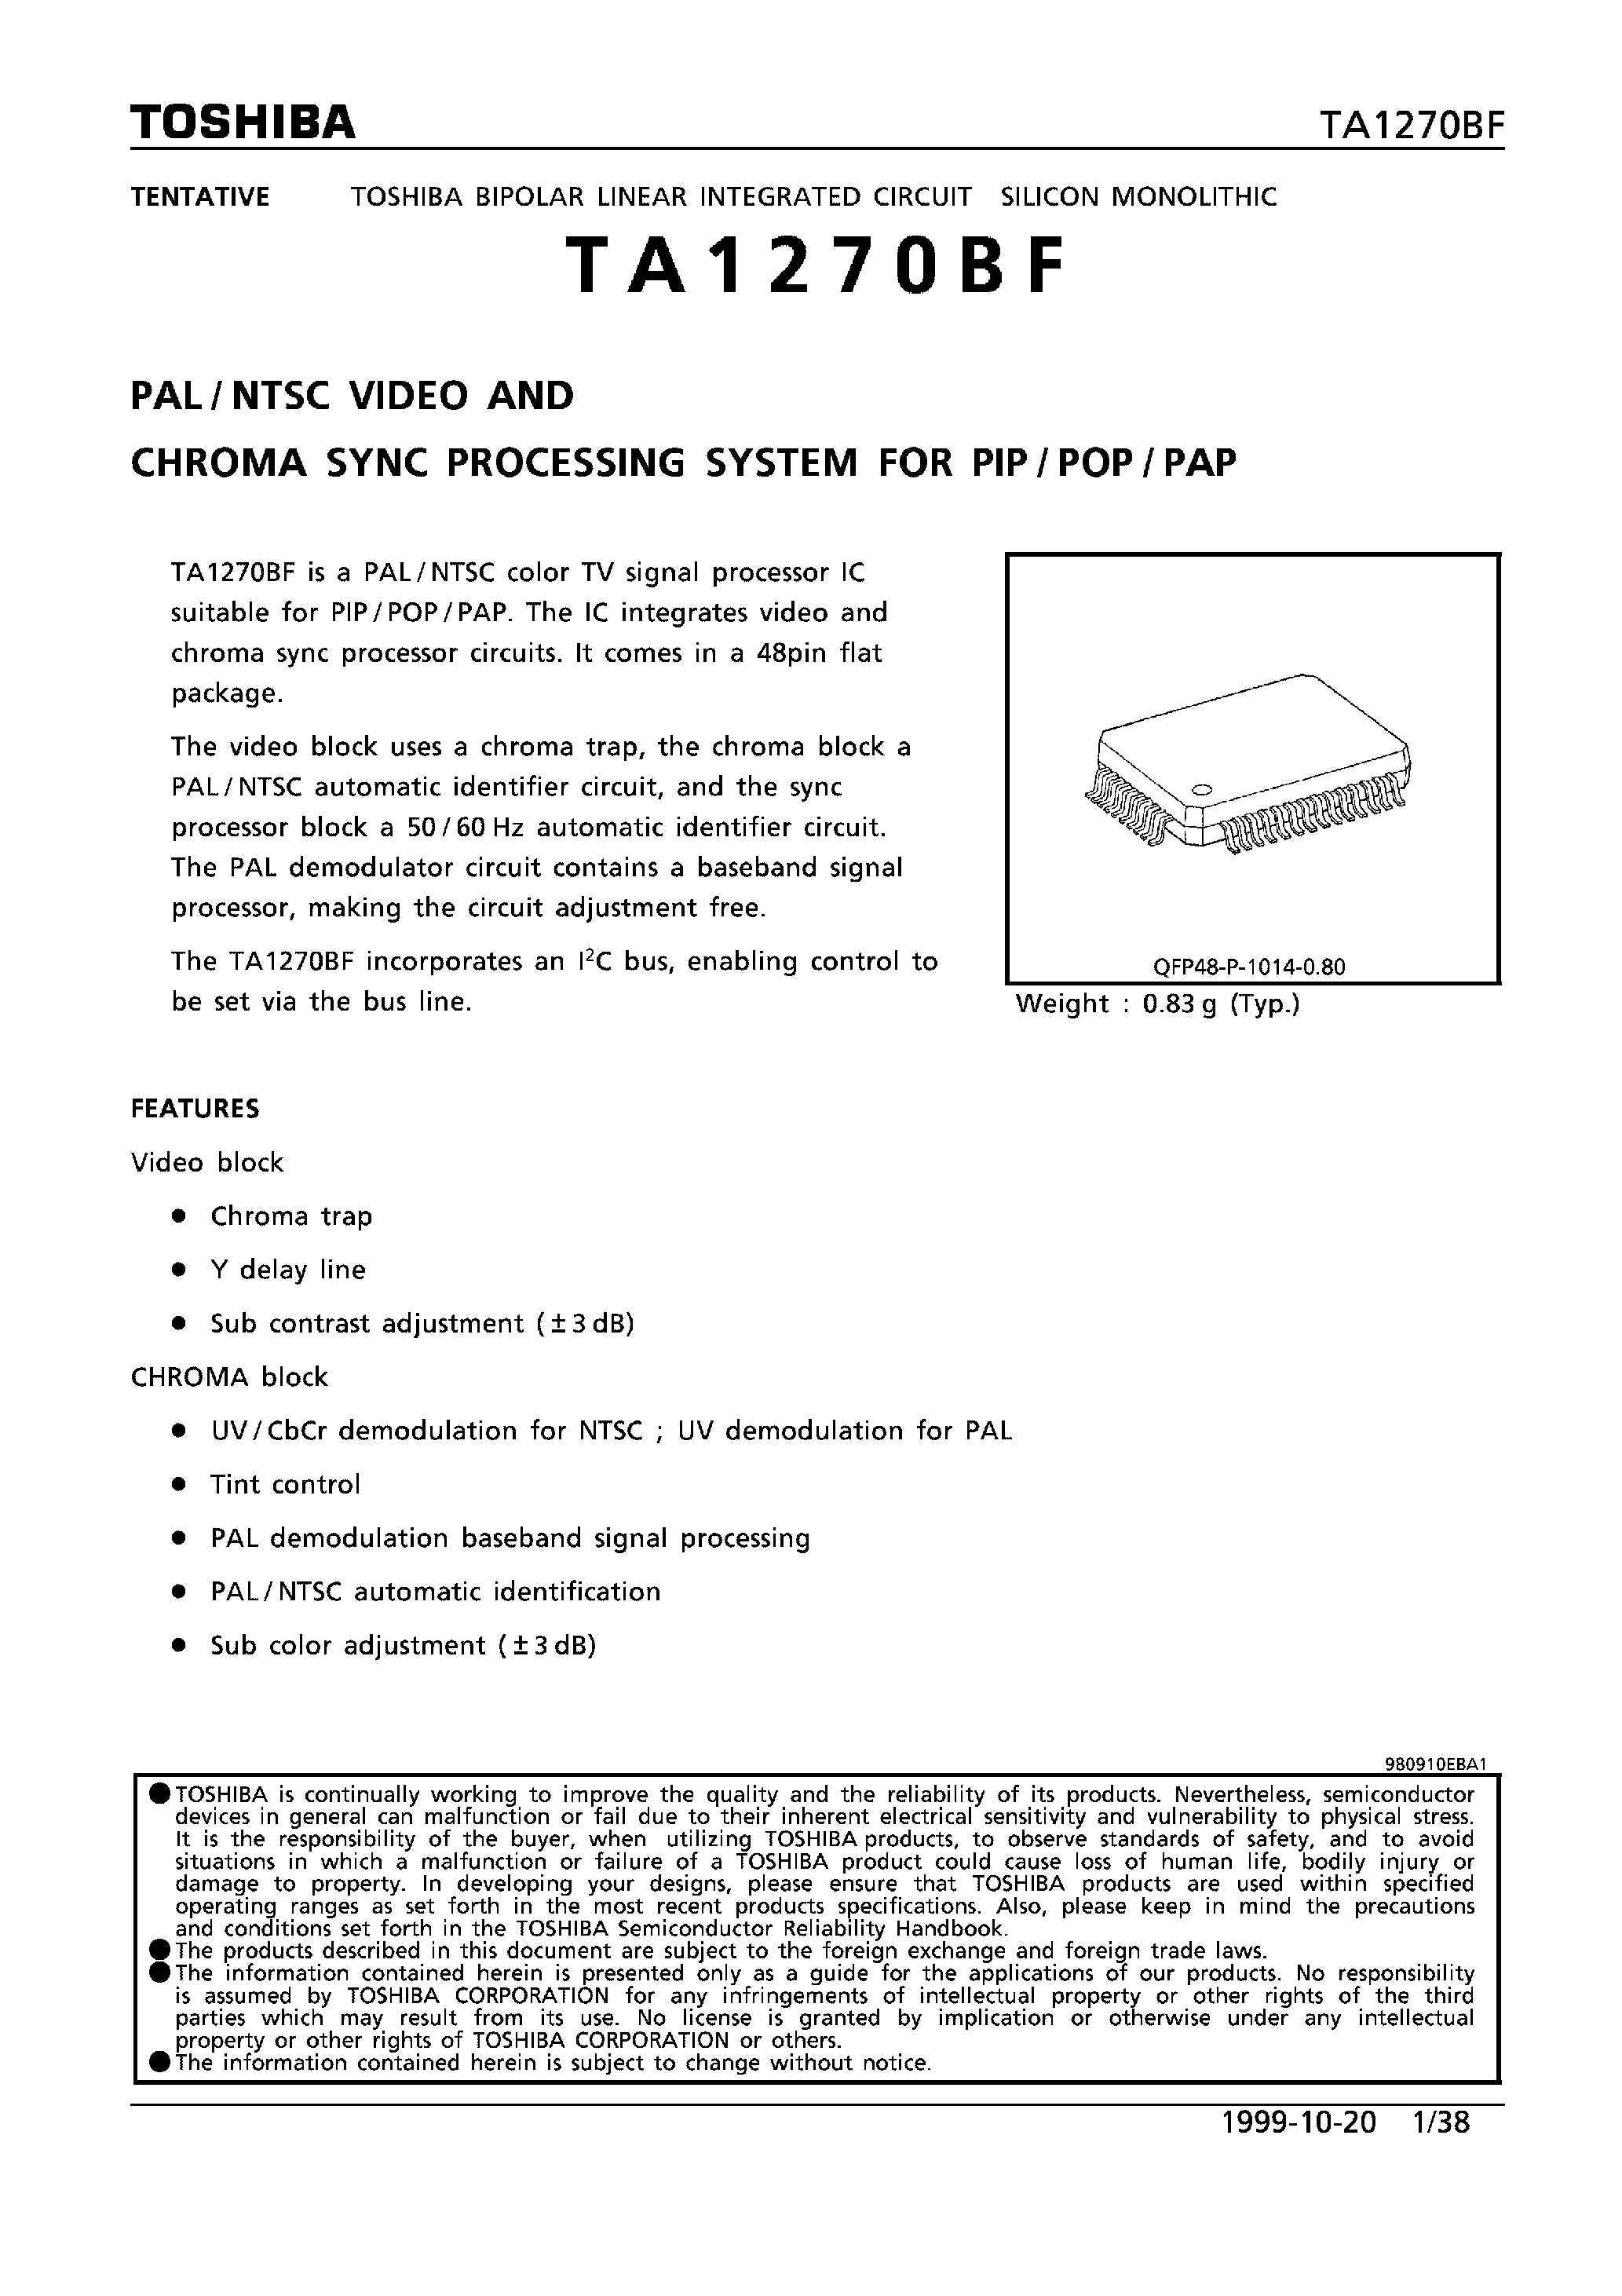 Даташит TA1270BF - PAL/NTSC VIDEO AND CHROMA SYNC PROCESSING SYSTEM FOR PIP/POP/PAP страница 1